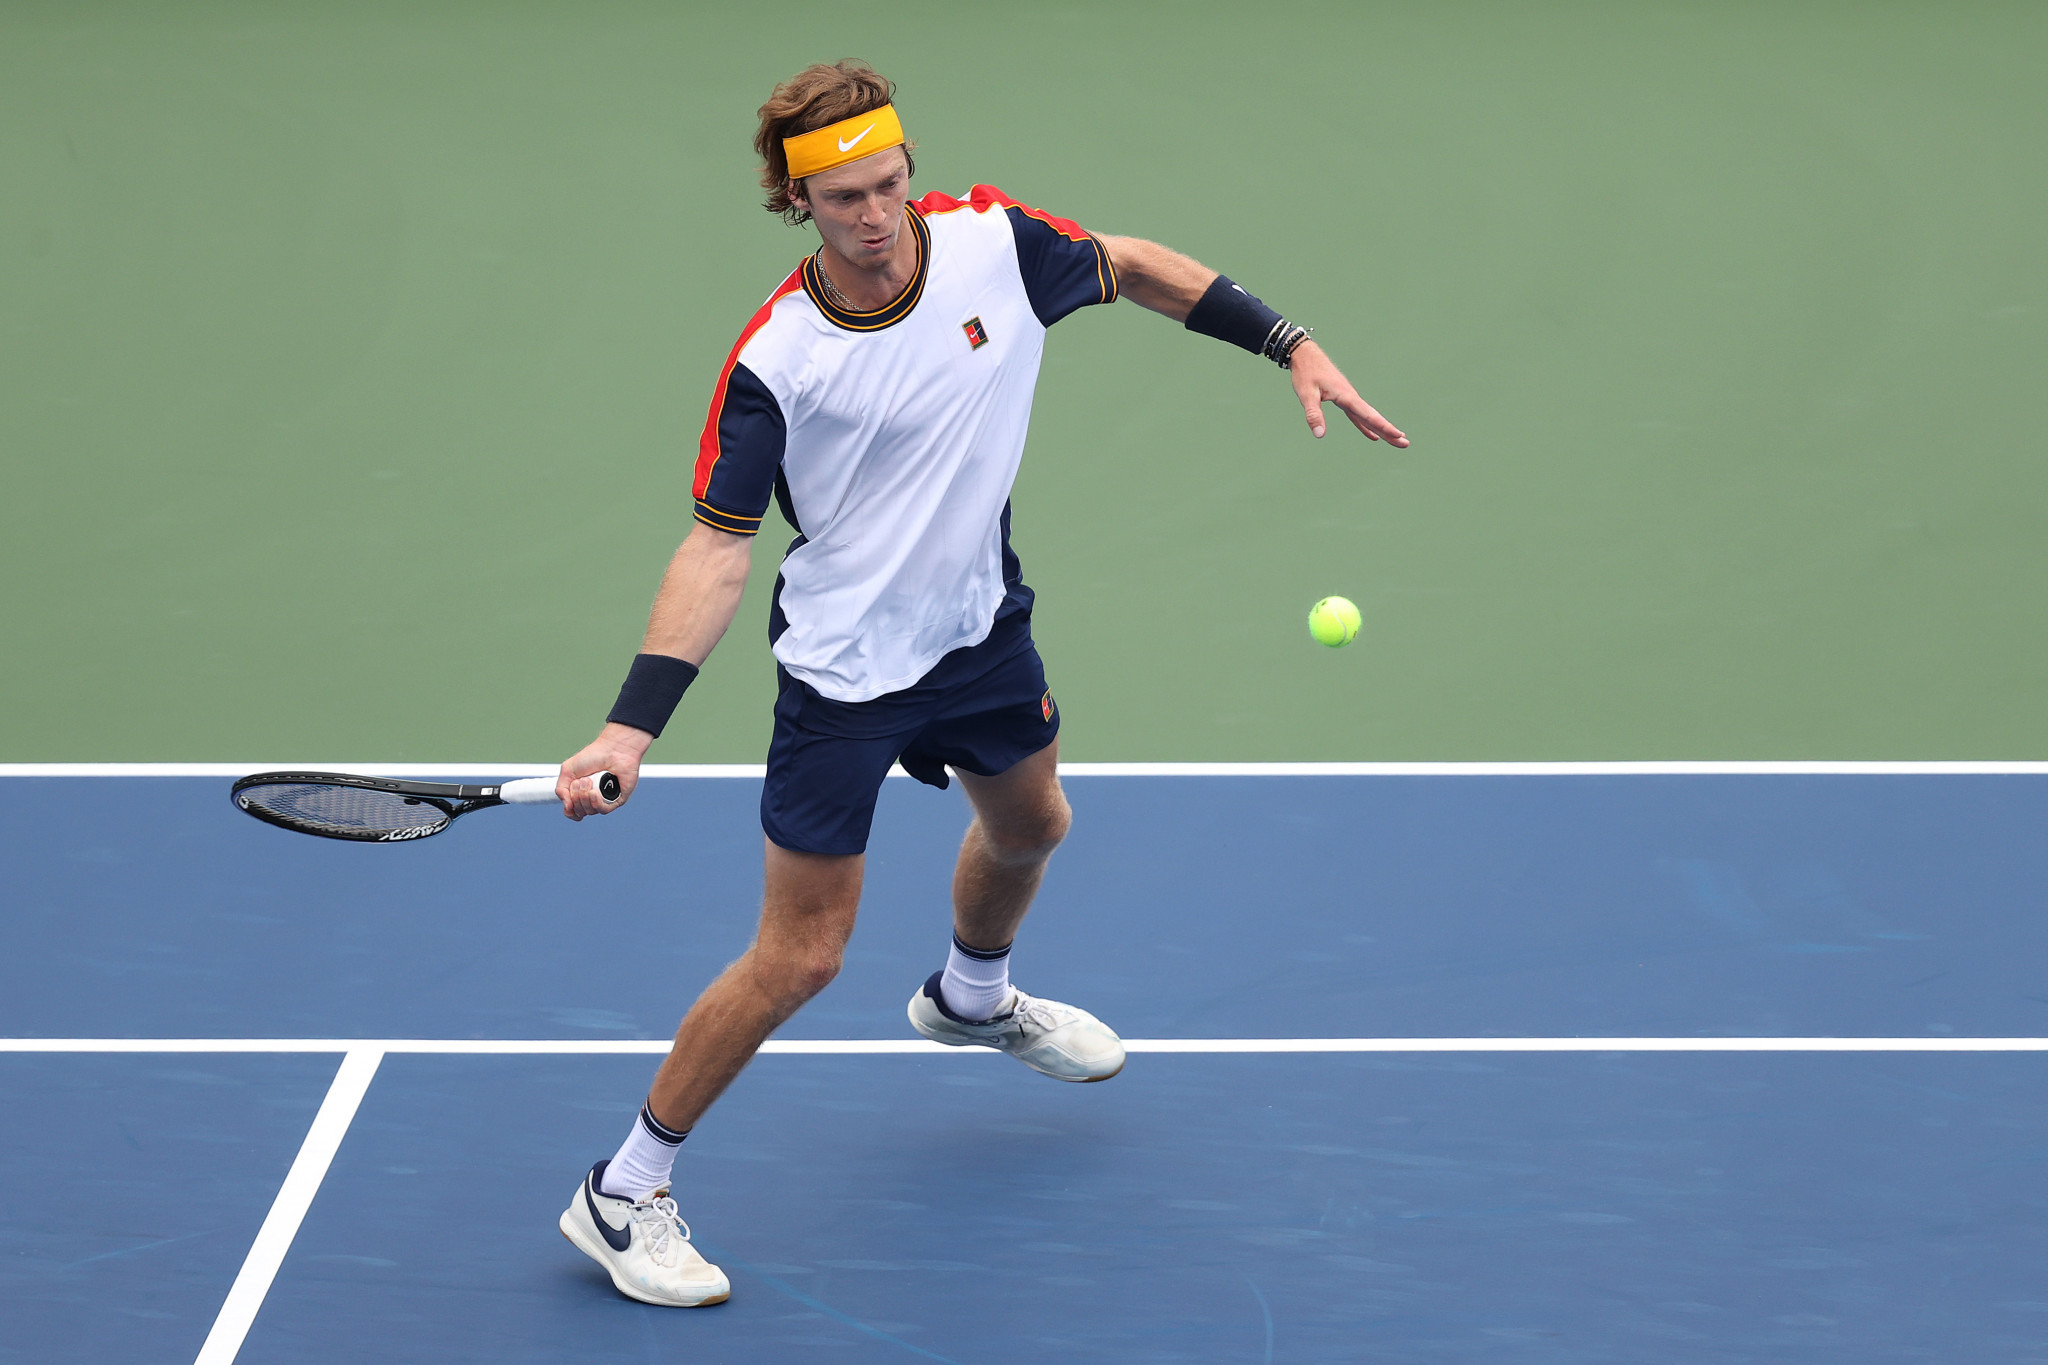 Rublev and Medvedev march on in men's singles draw at US Open